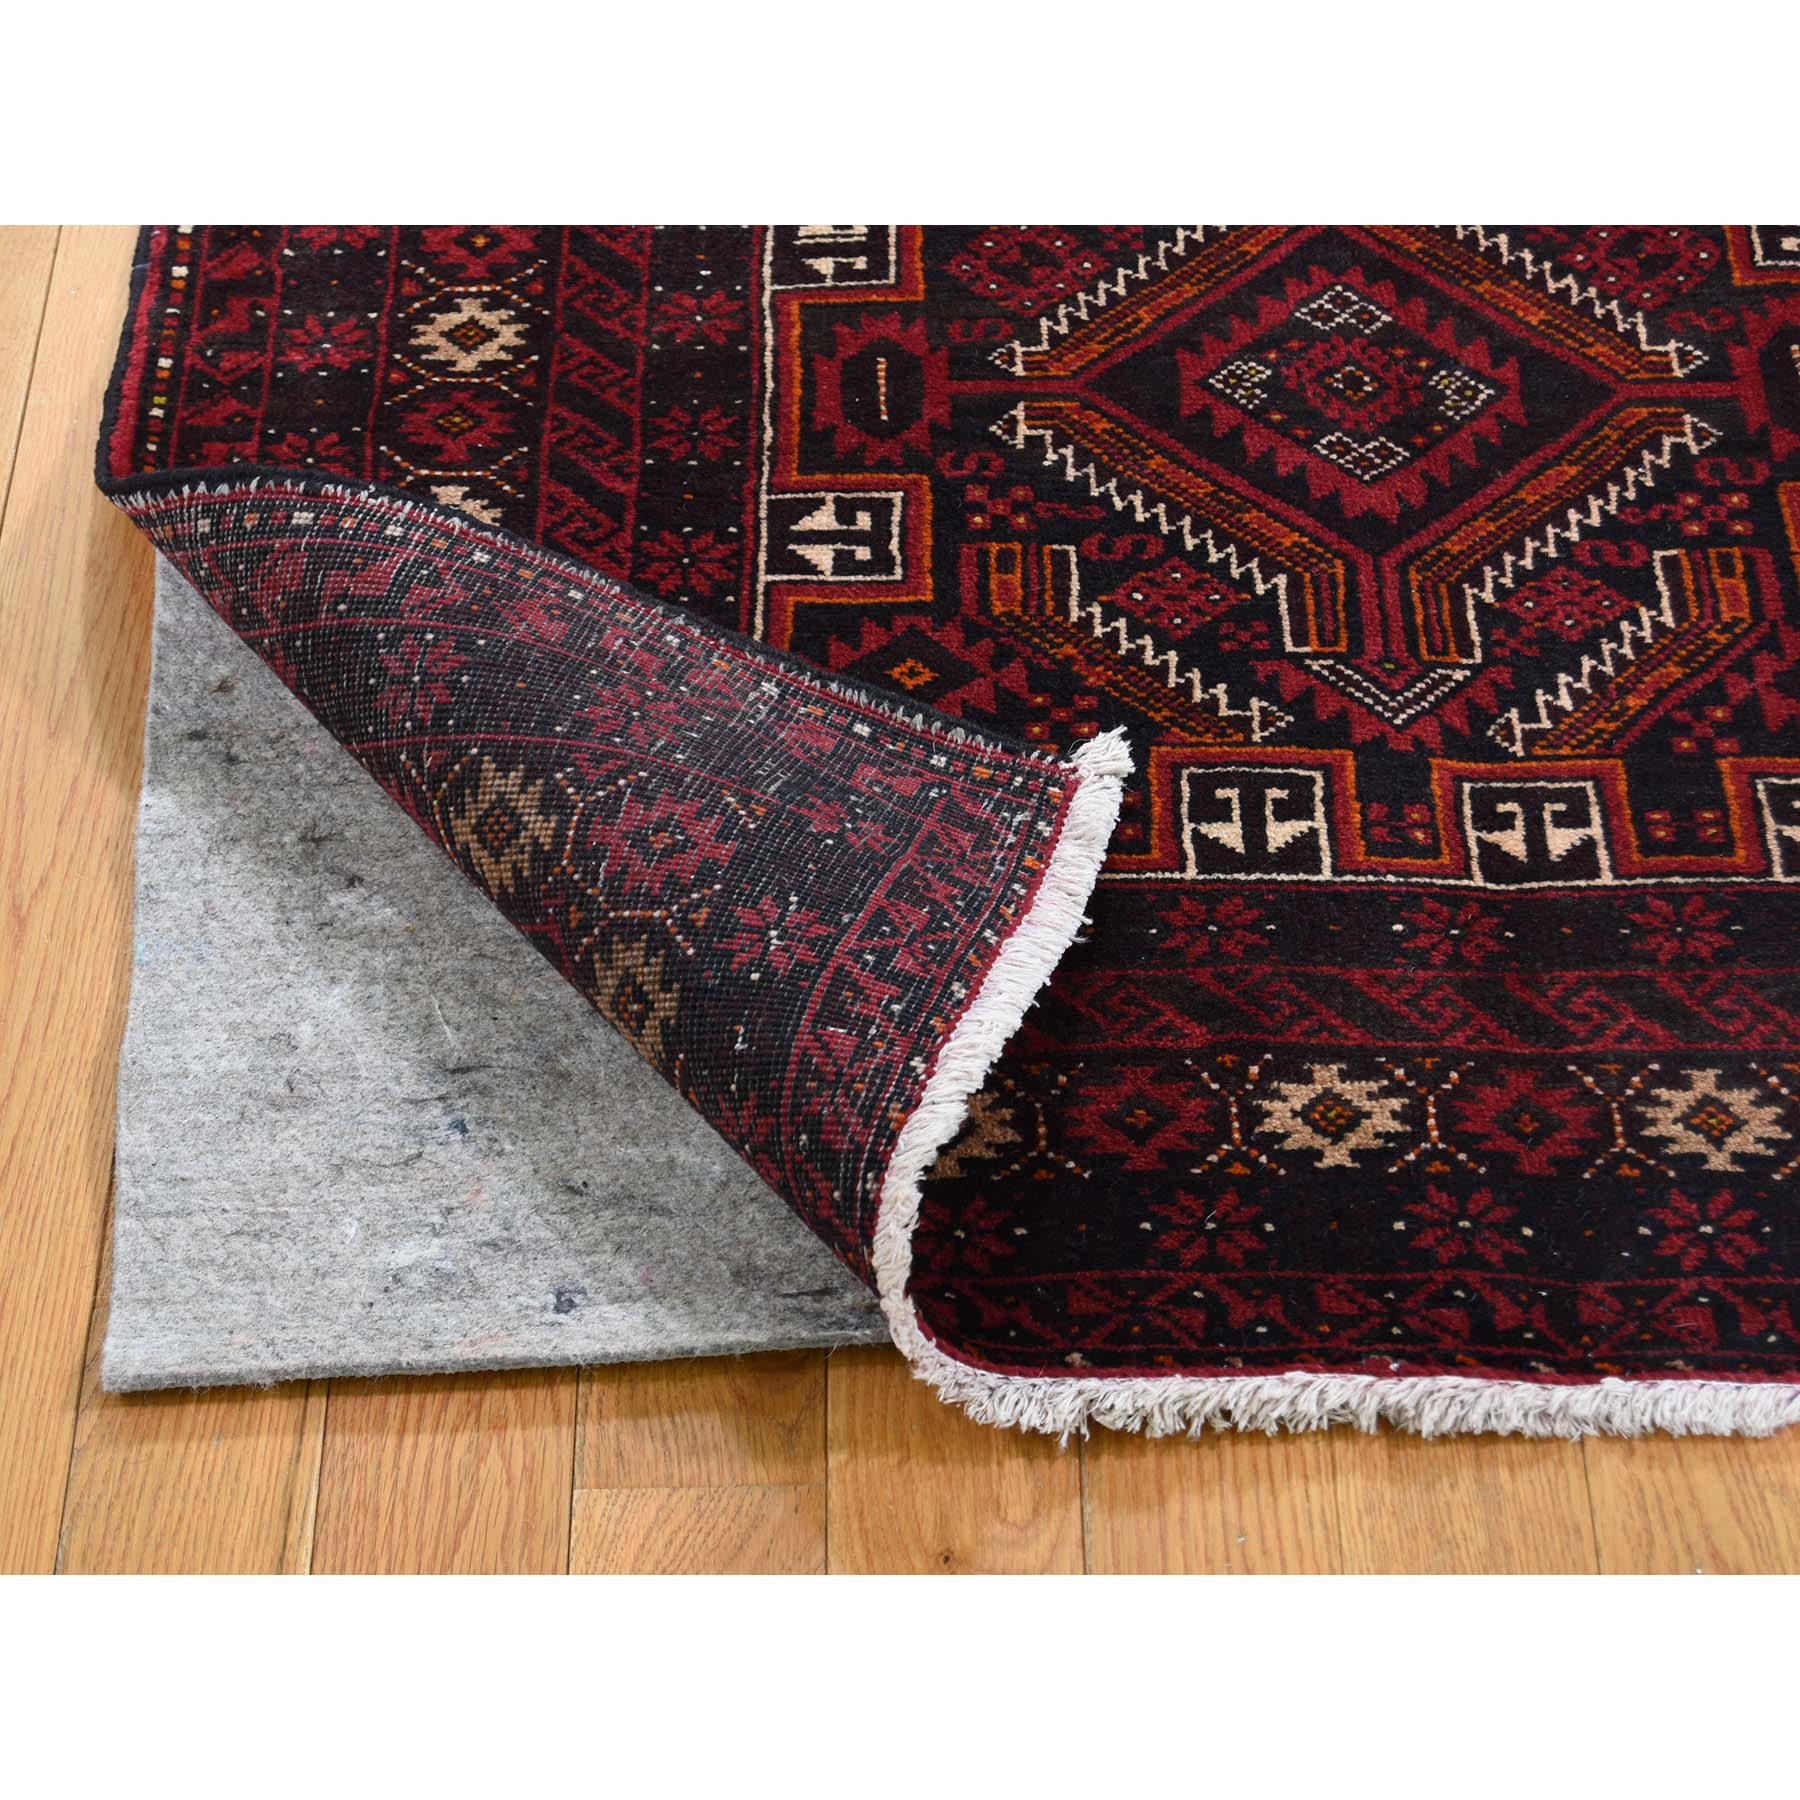 3-4 x6-5  Vintage Bohemian Persian Baluch Pure Wool Red Hand-knotted Oriental Rug 